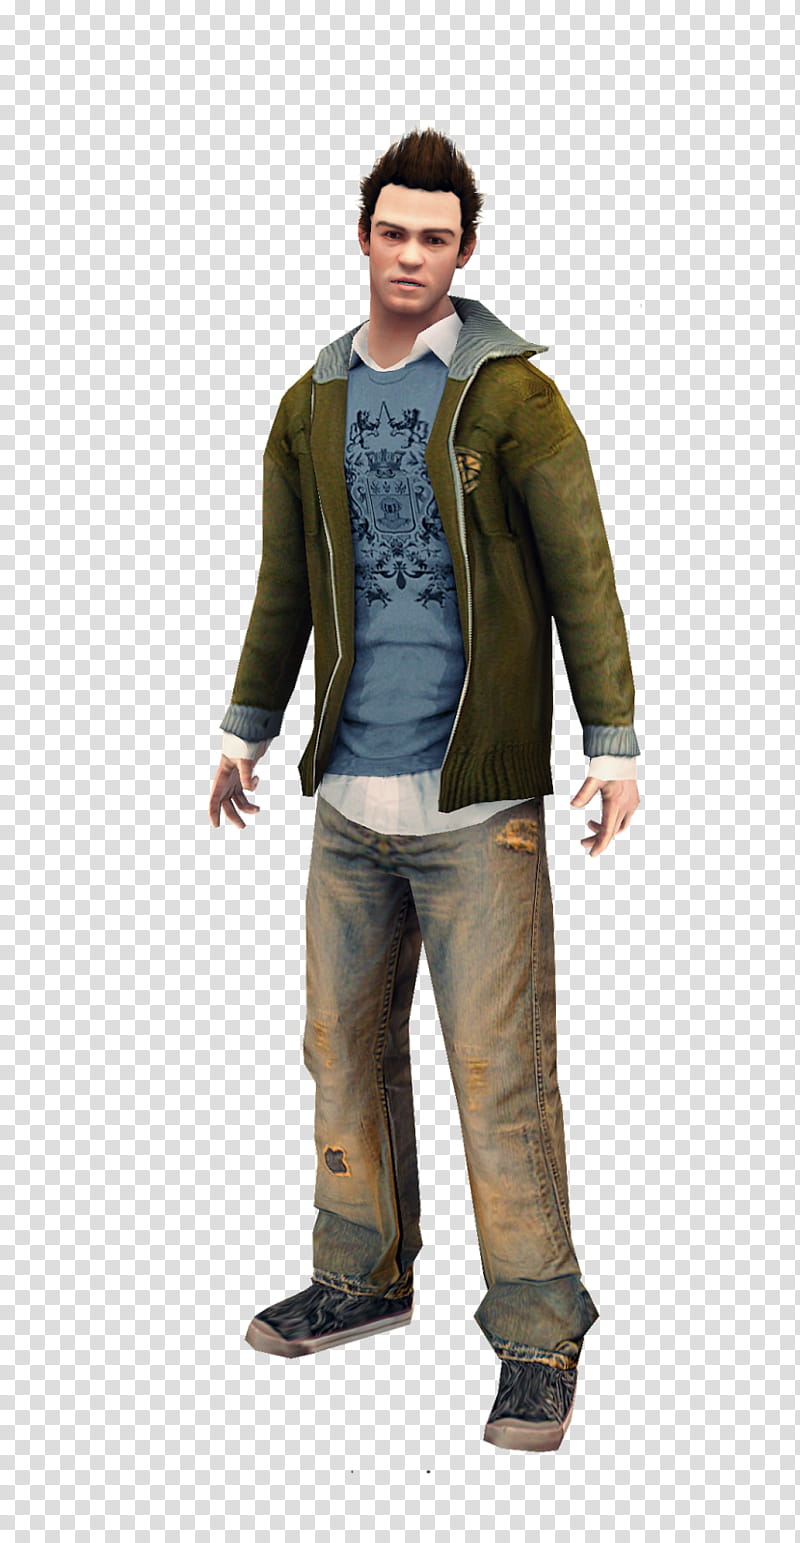 Jeans, Obscure Ii, Video Games, Survival Horror, Playstation 2, Character, Digital Art, Wii transparent background PNG clipart